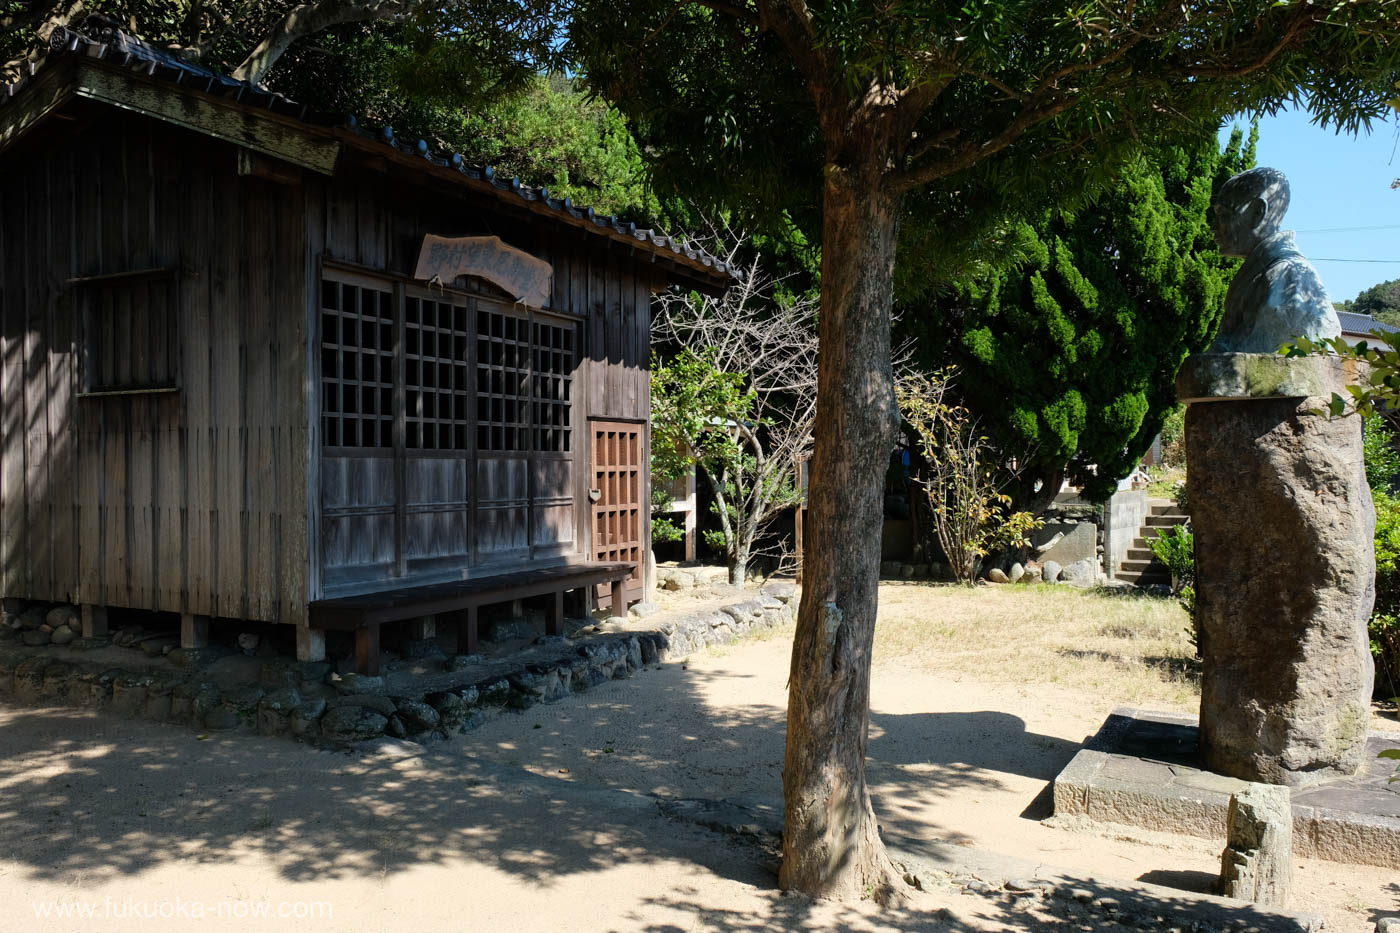 Itoshima Himeshima - the cabin in which the poet Botoni Nomura was exiled to in the late Edo period, 糸島の姫島内にある野村望東尼御堂